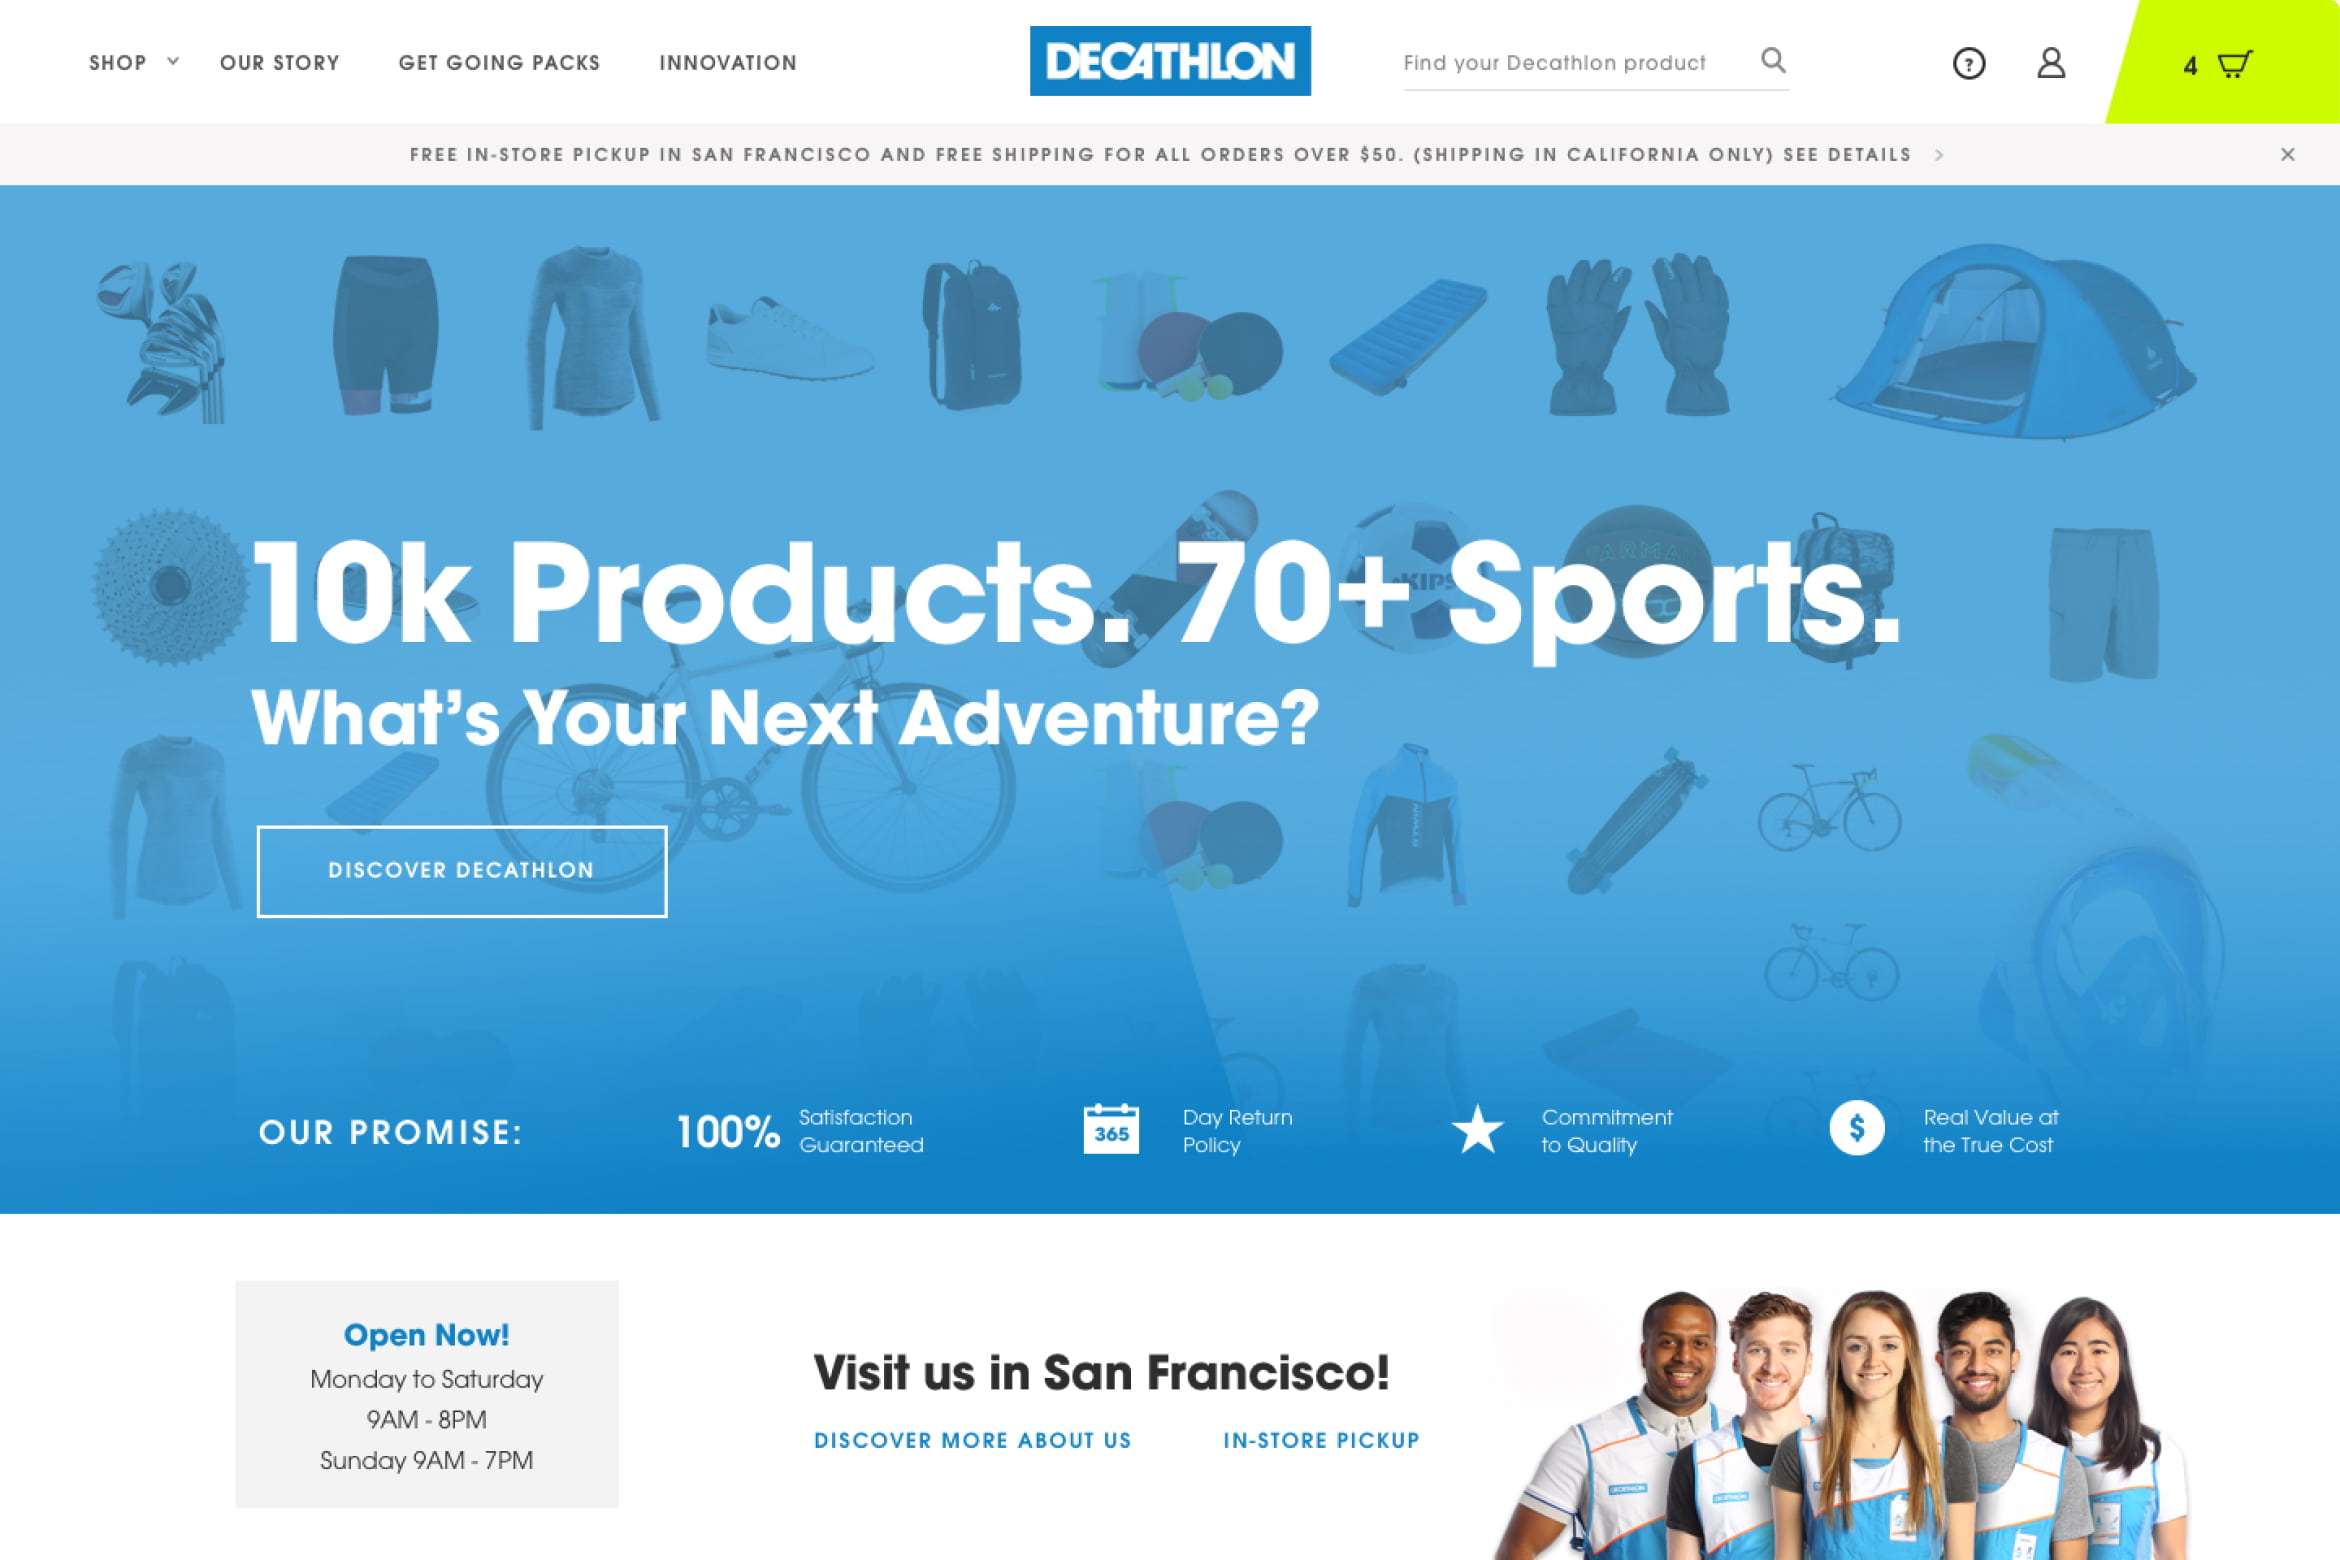 promotion of sports products and accessories. people dressed in the Decathlon company uniform